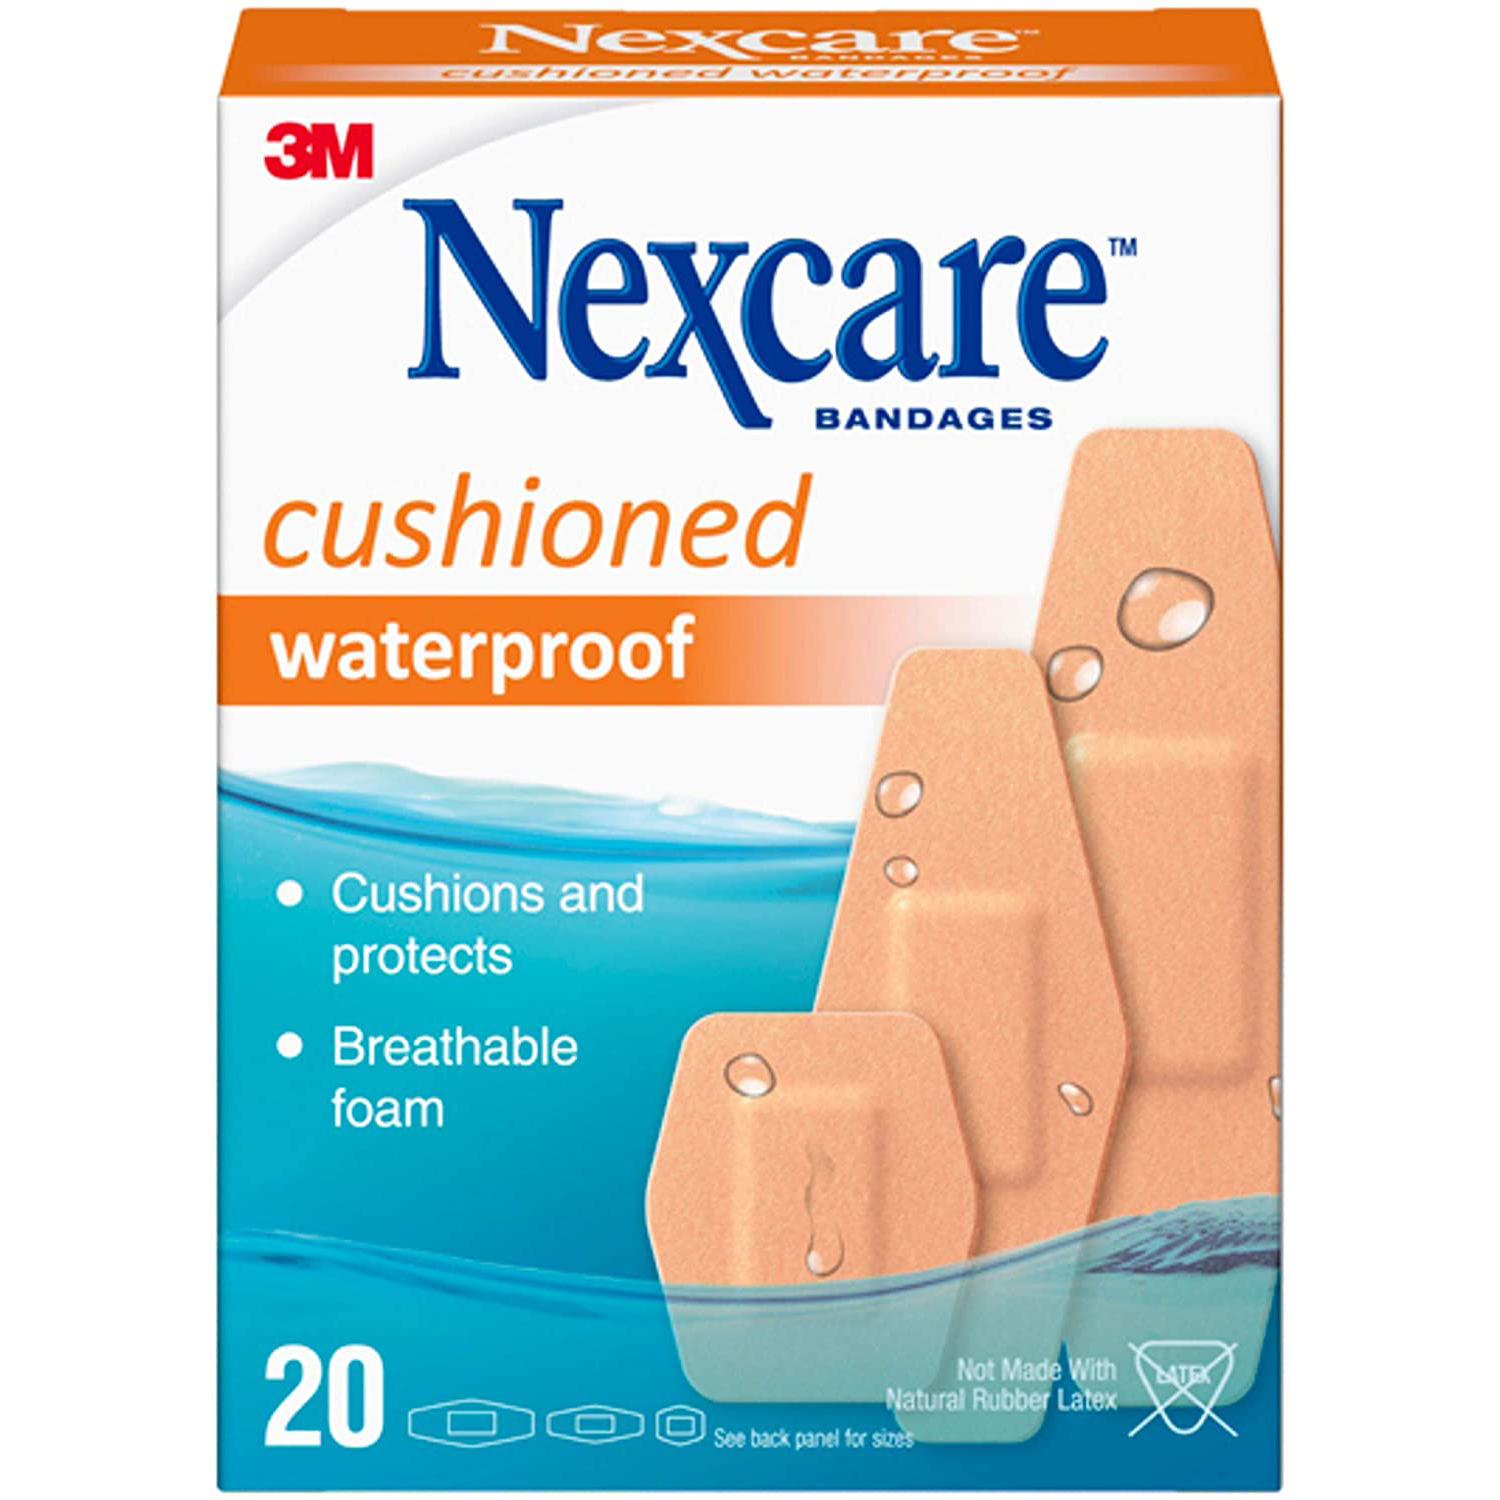 Nexcare Cushioned Waterproof Bandages &amp; Pads